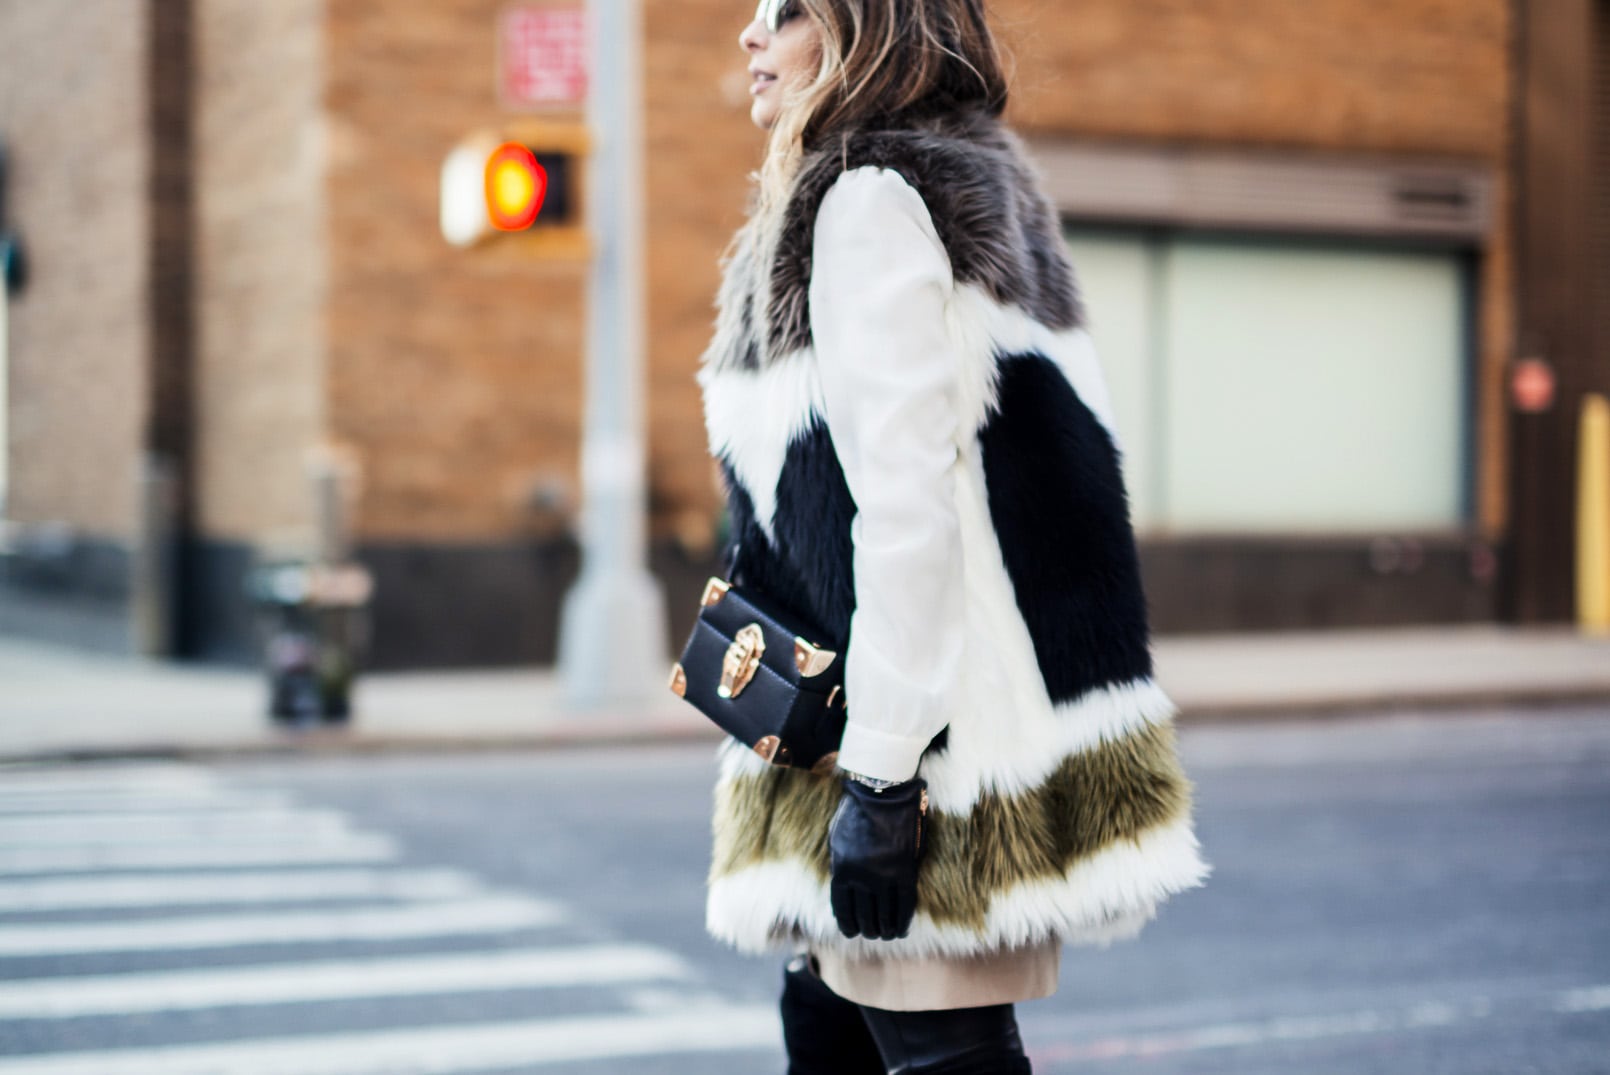 Pam Hetlinger wearing a dawn levy fur coat, black over the knee boots, and khaki shift dress. new york fashion week.